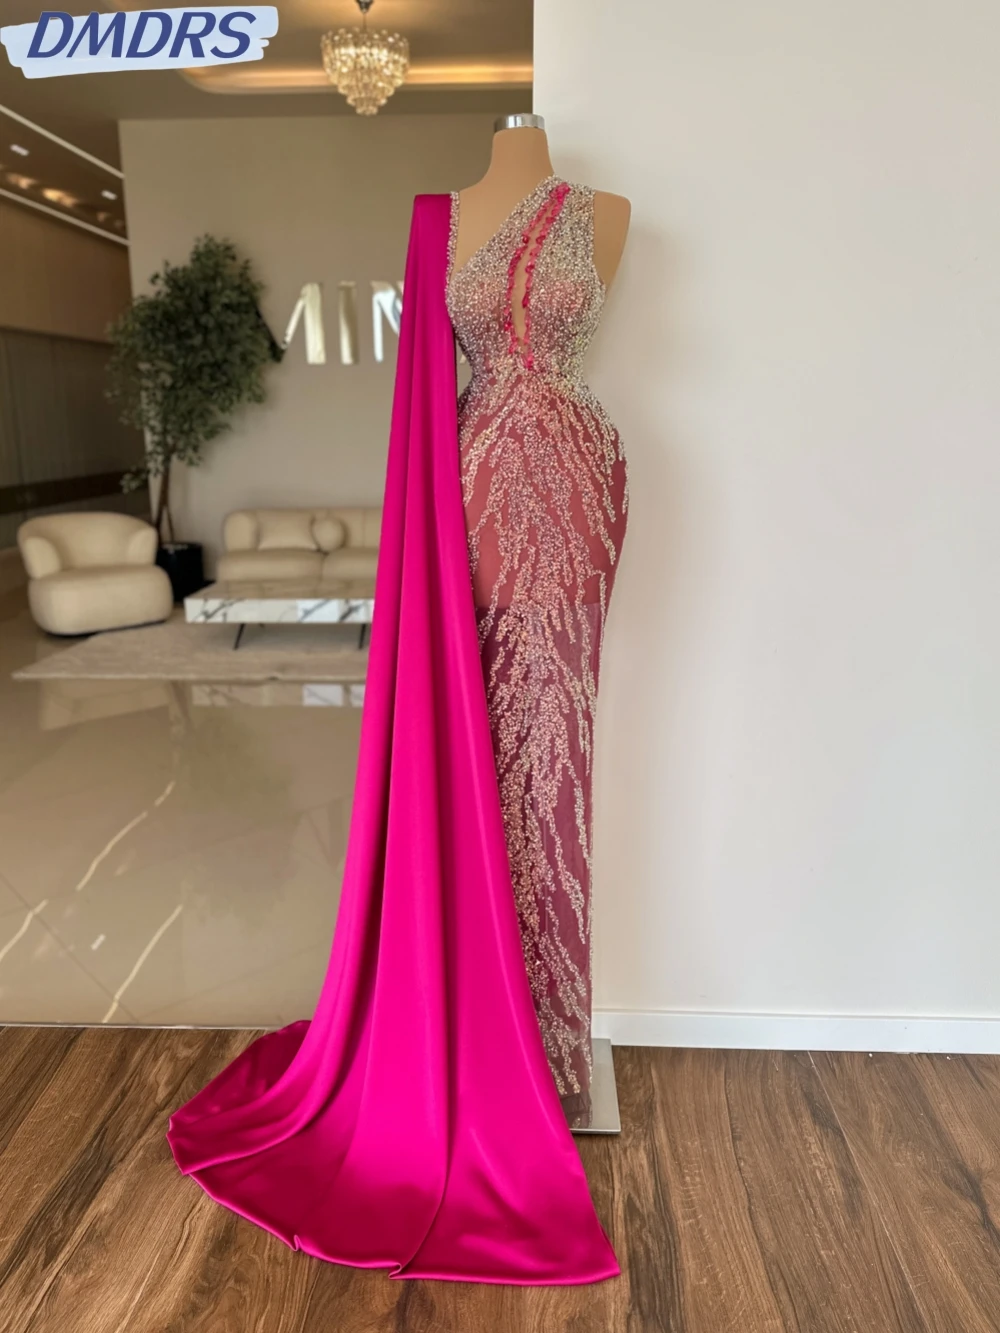 

Side Cape One Shoulder Prom Gown Sparkly Sequins Pearls Cocktail Dresses Luxury Sexy Illusion Long Evening Dress Robe De Mariée